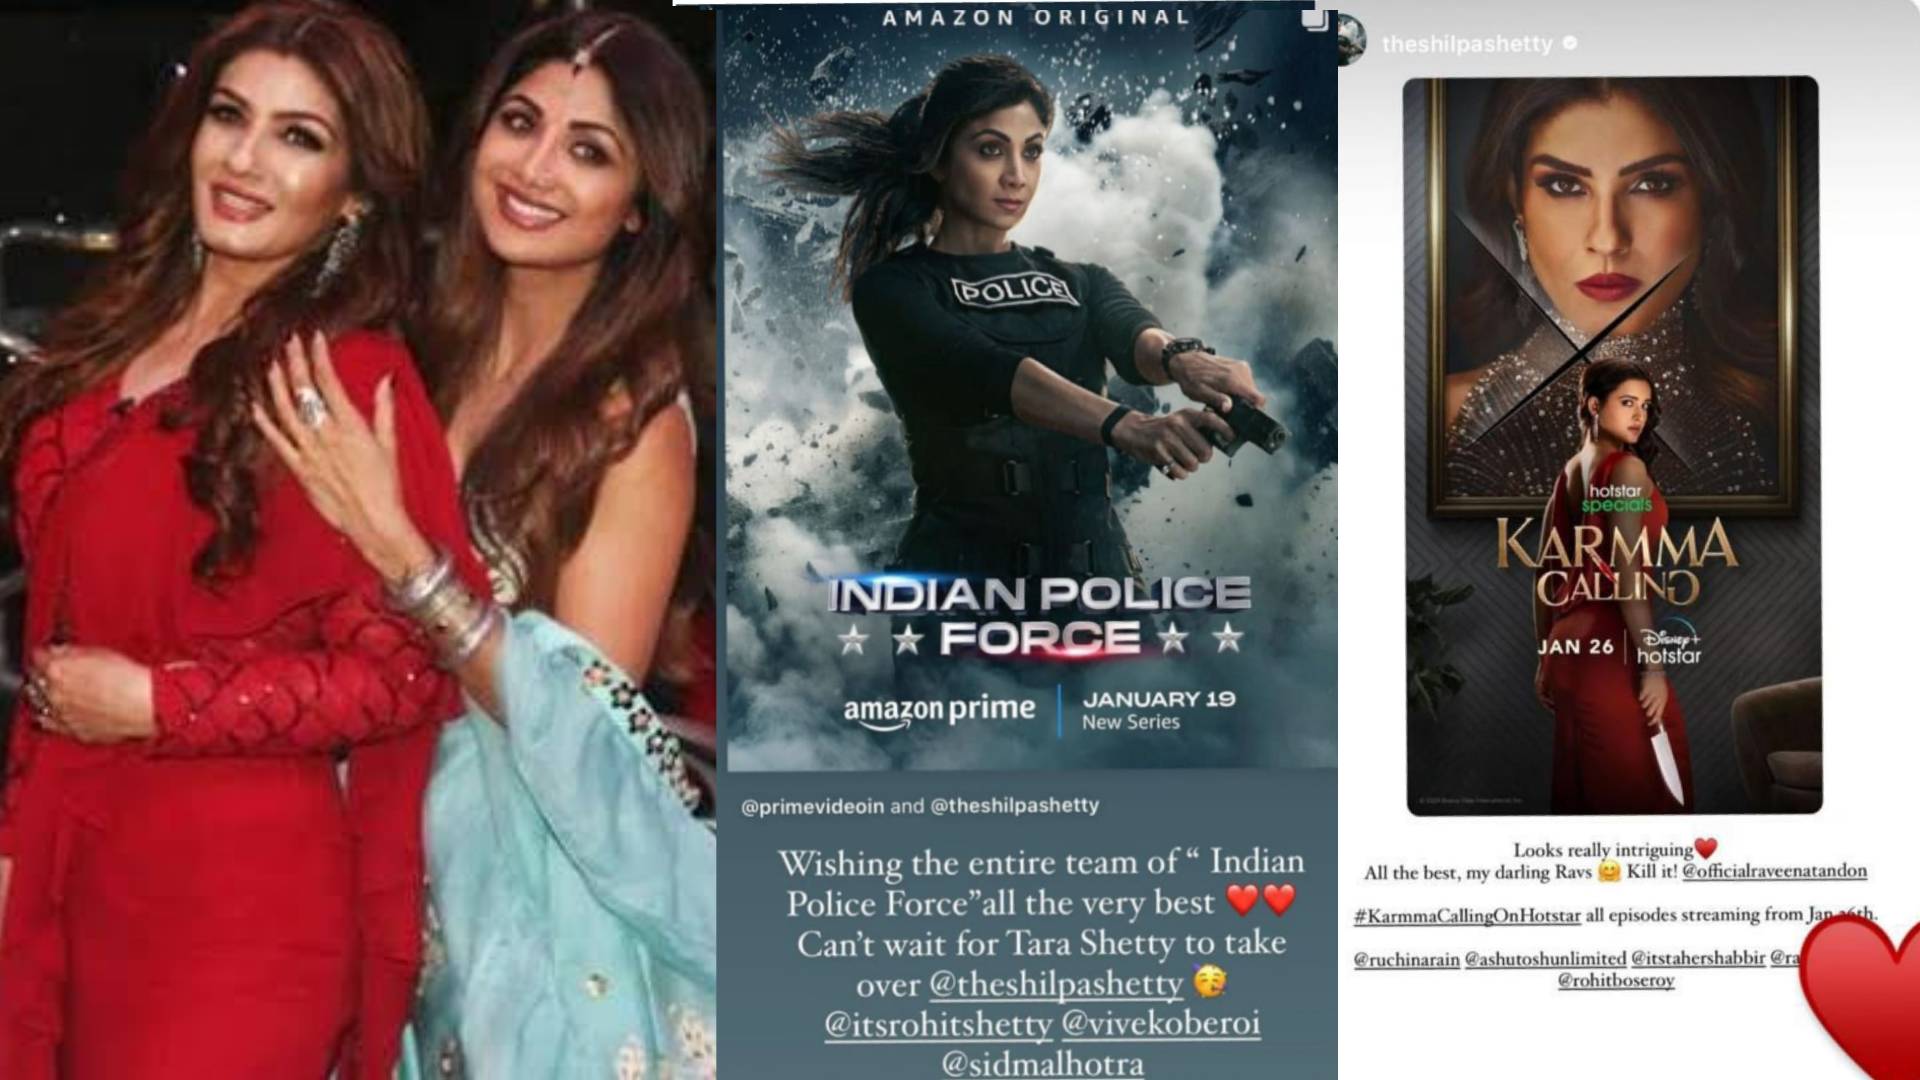 Raveena Tandon and Shilpa Shetty Support Each Other’s Shows on Social Media, Highlighting Genuine Friendship in Bollywood